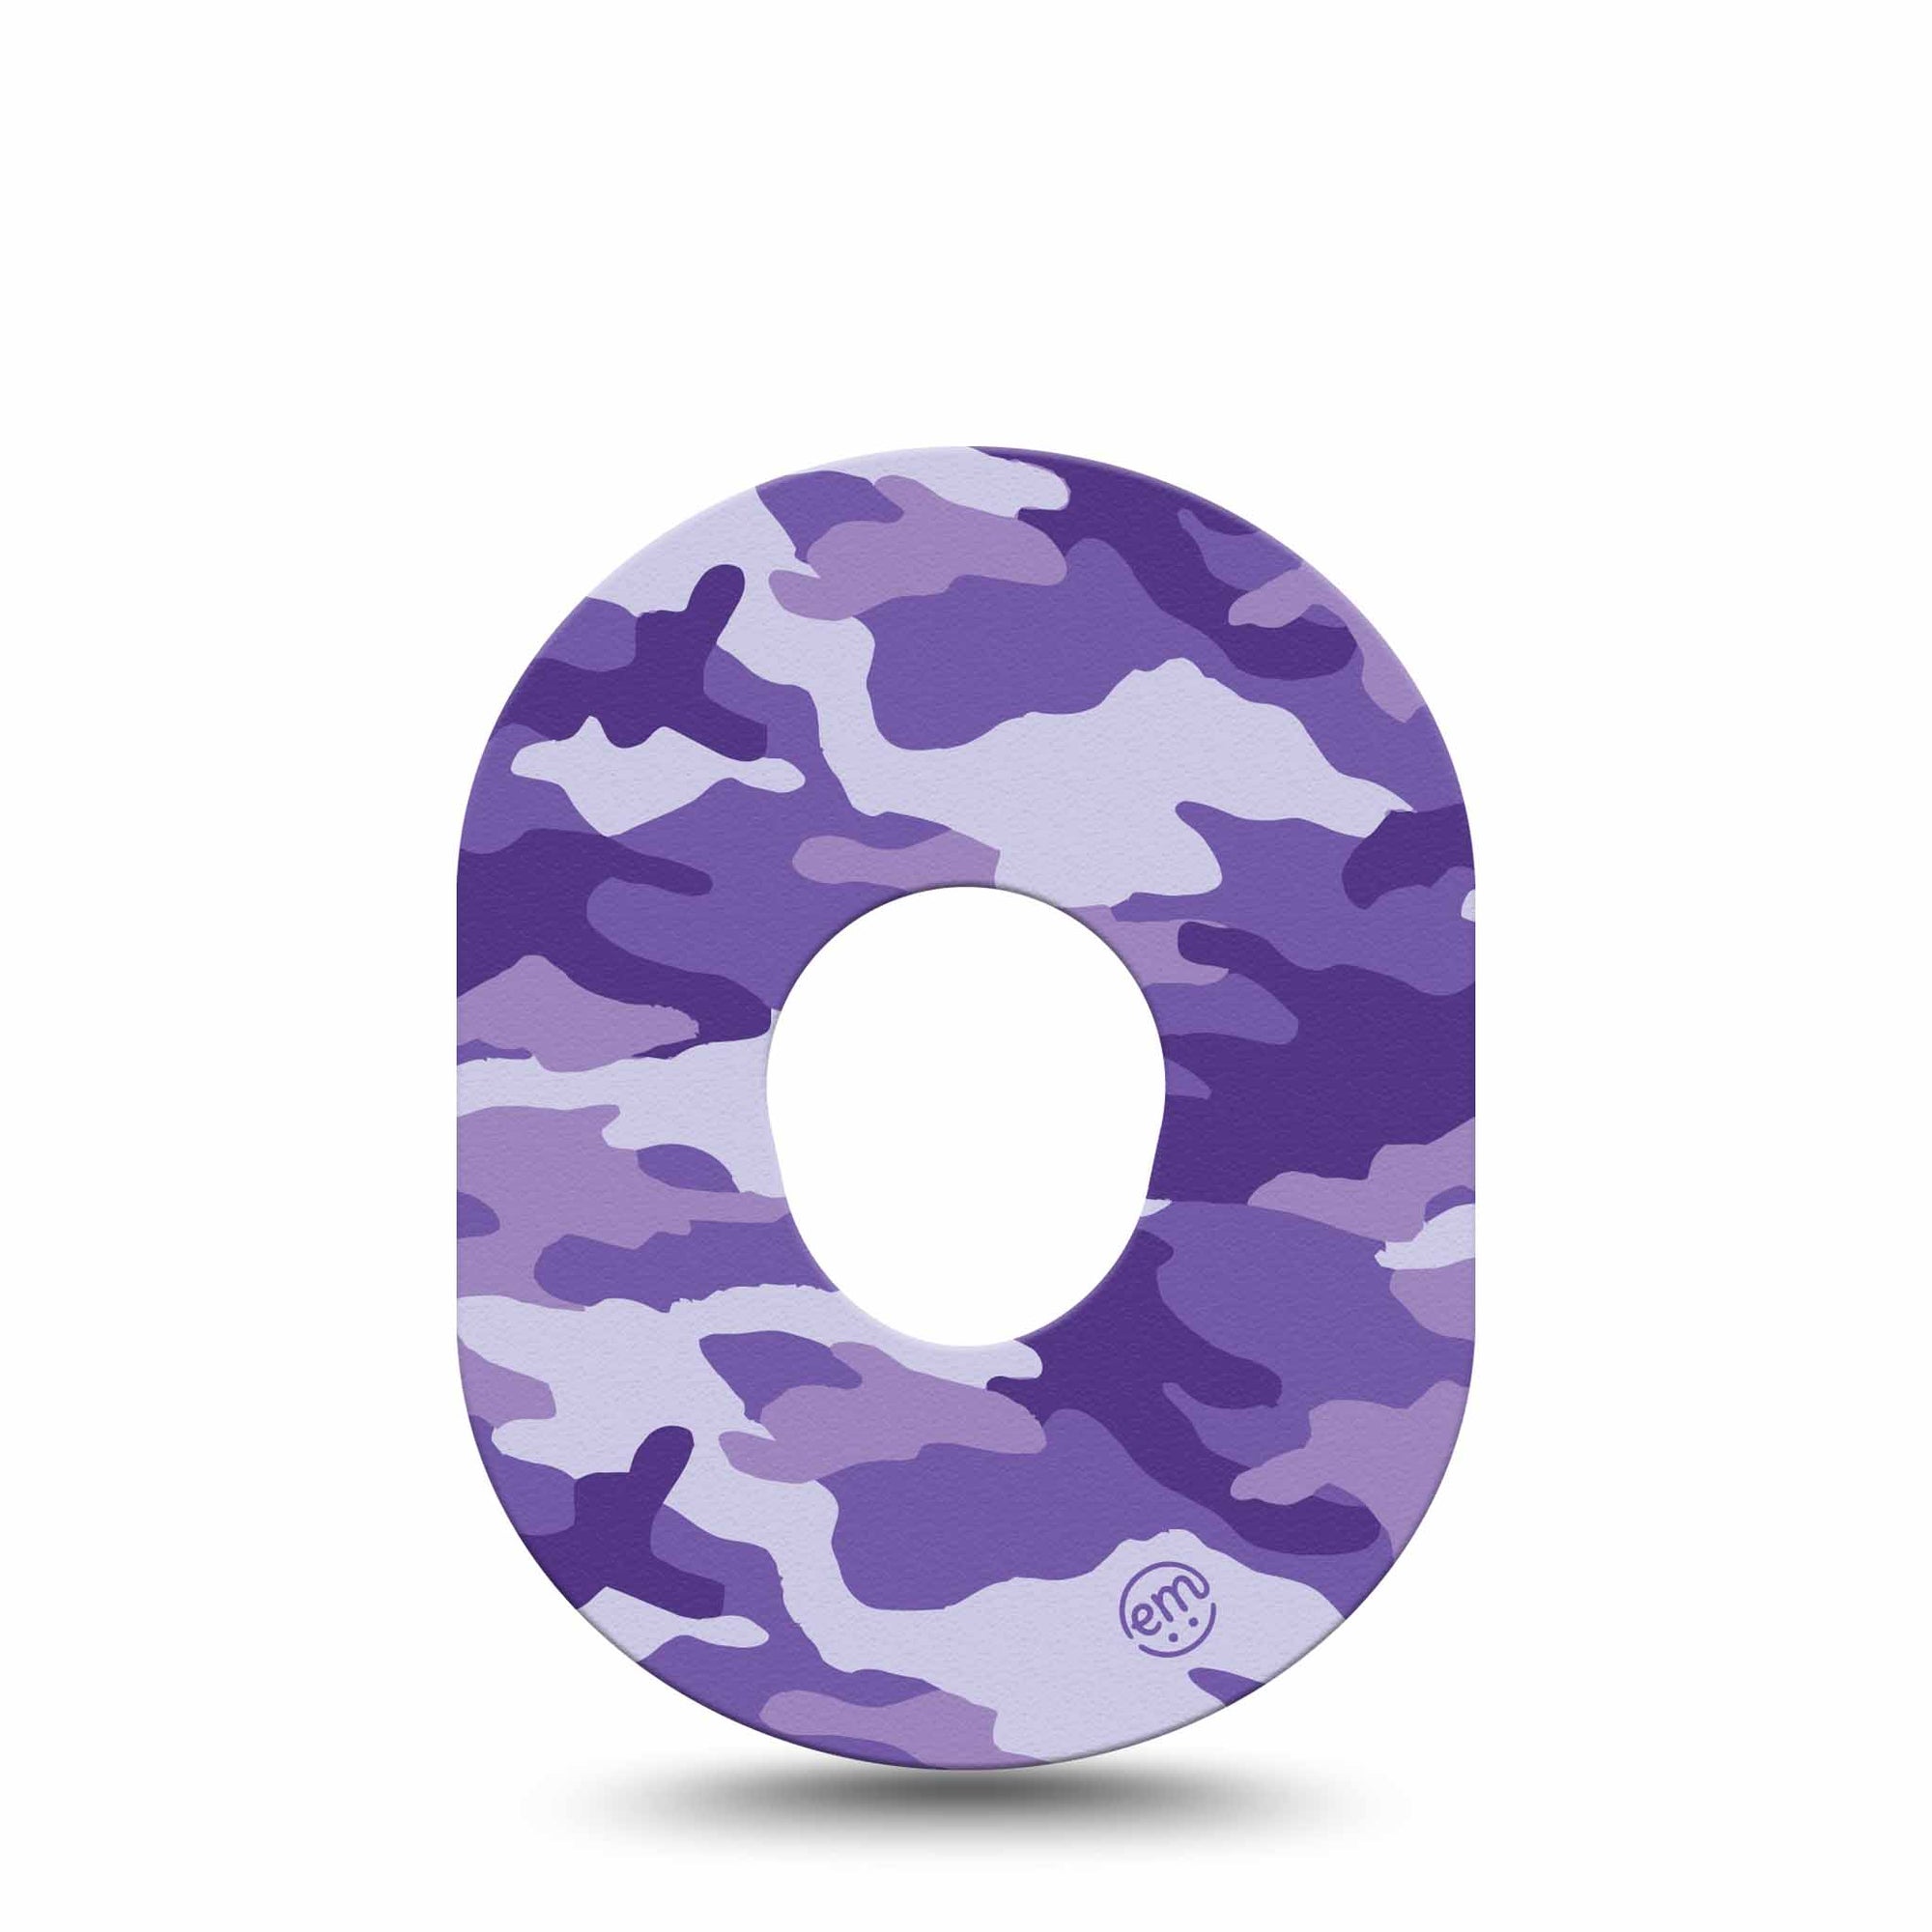 ExpressionMed Purple Camo Dexcom G7 Tape, Single, Amateur Camouflage Themed, CGM Adhesive Patch Design